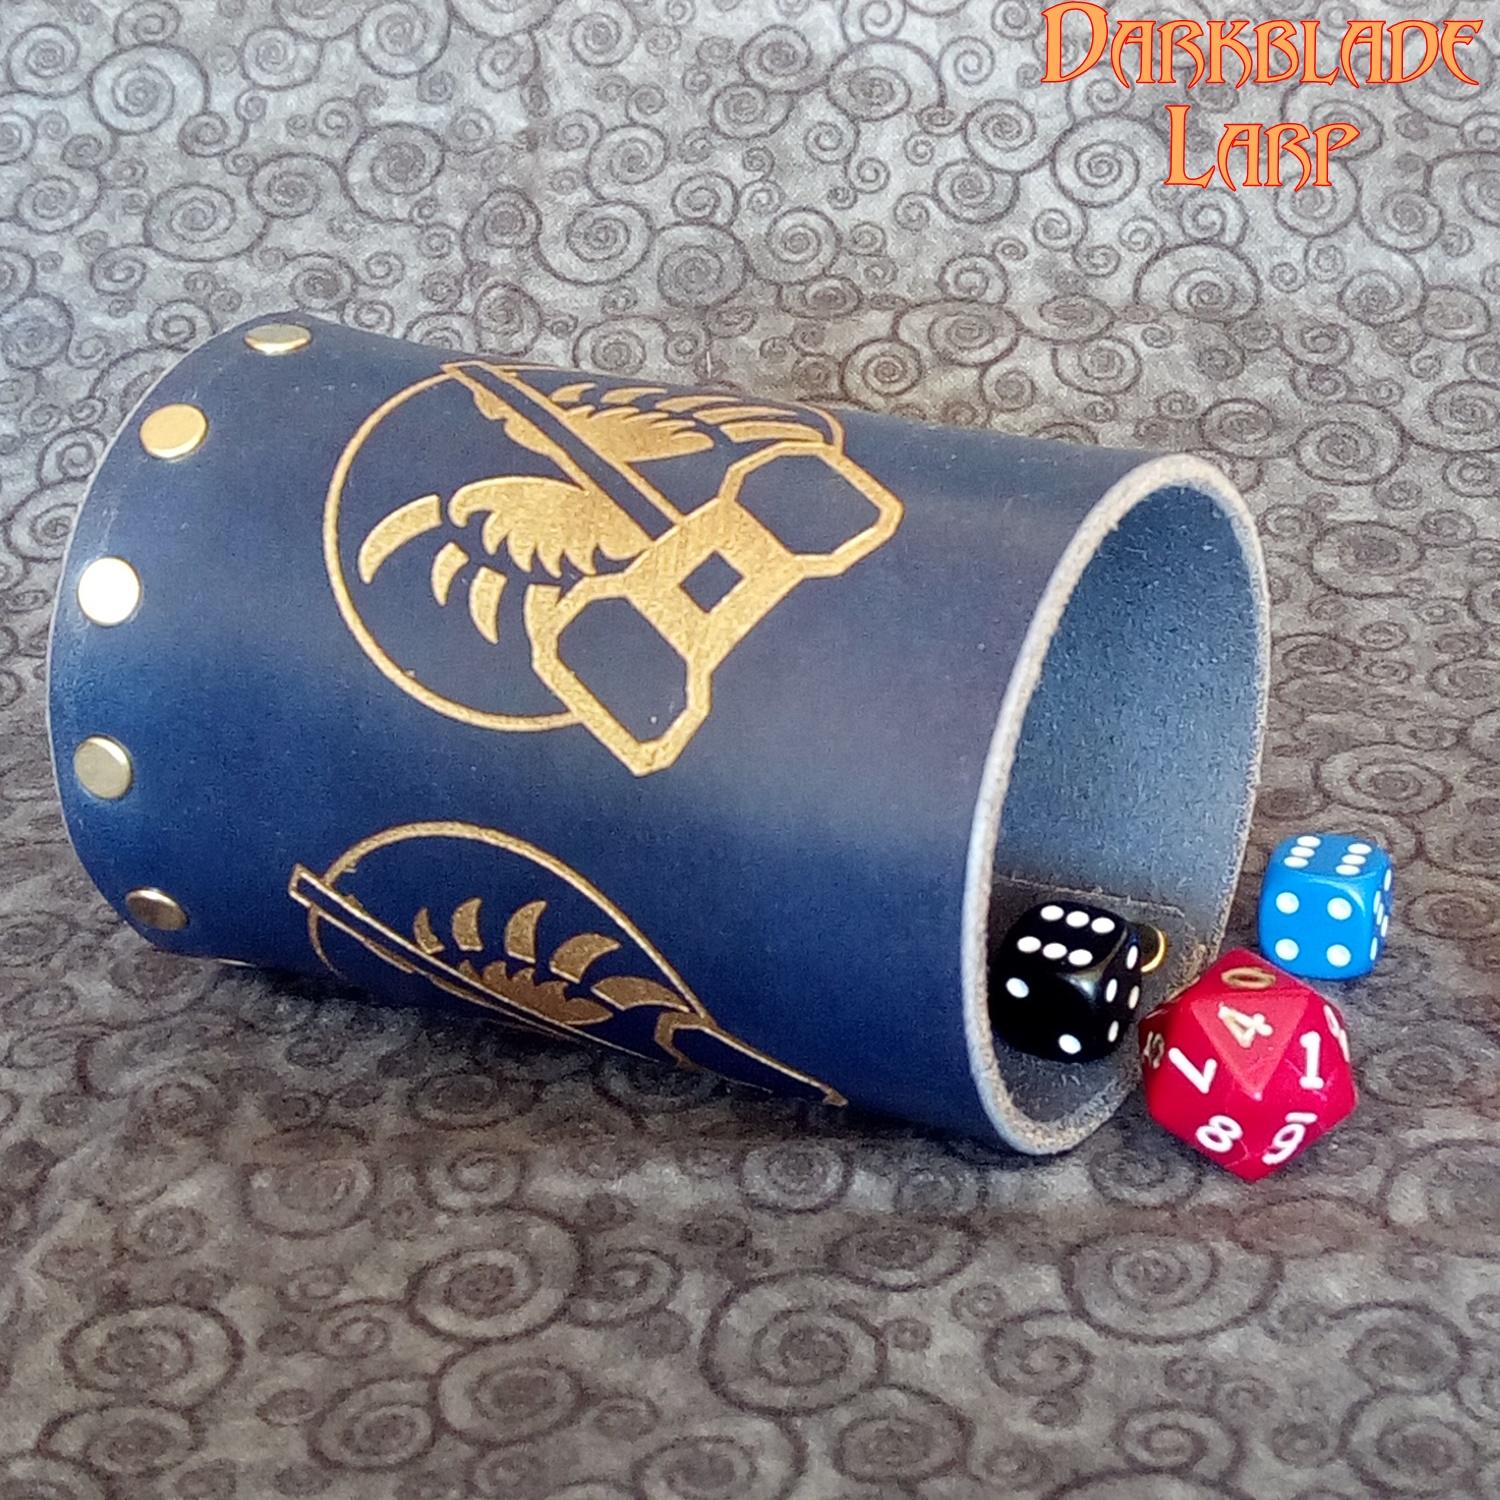 A blue cup with a clericsal symbol engraved on it lying on its side. There are dice rolling out of it.